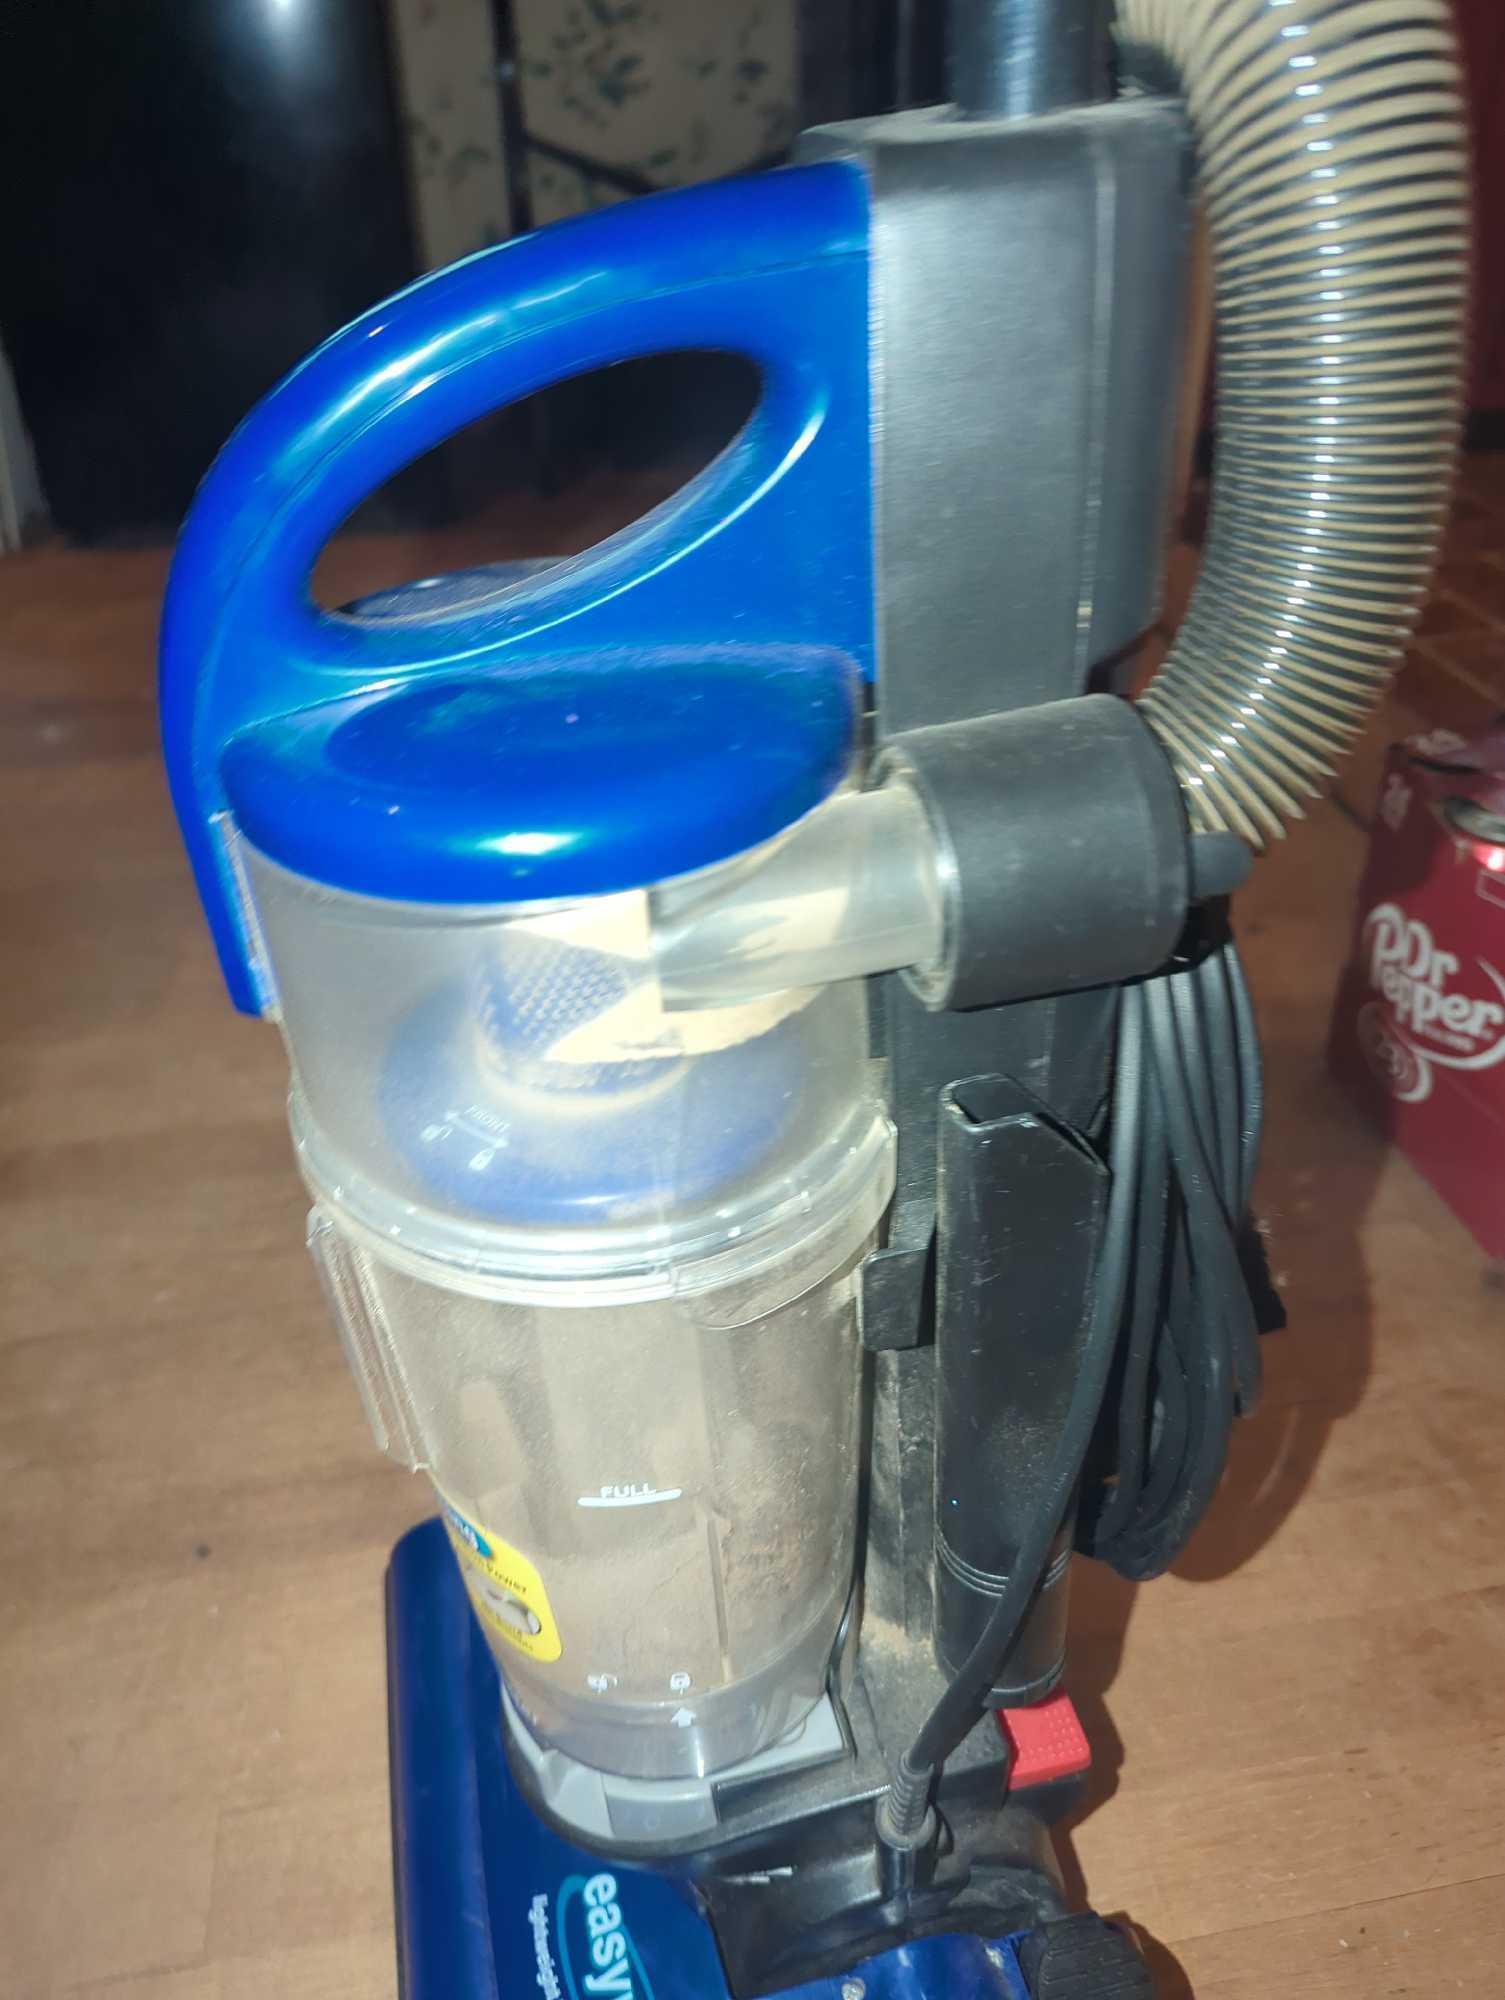 (DR) BISSELL EASY VAC? LIGHTWEIGHT UPRIGHT VACUUM, MODEL 3130-H, RETAIL PRICE $40, APPEARS TO BE